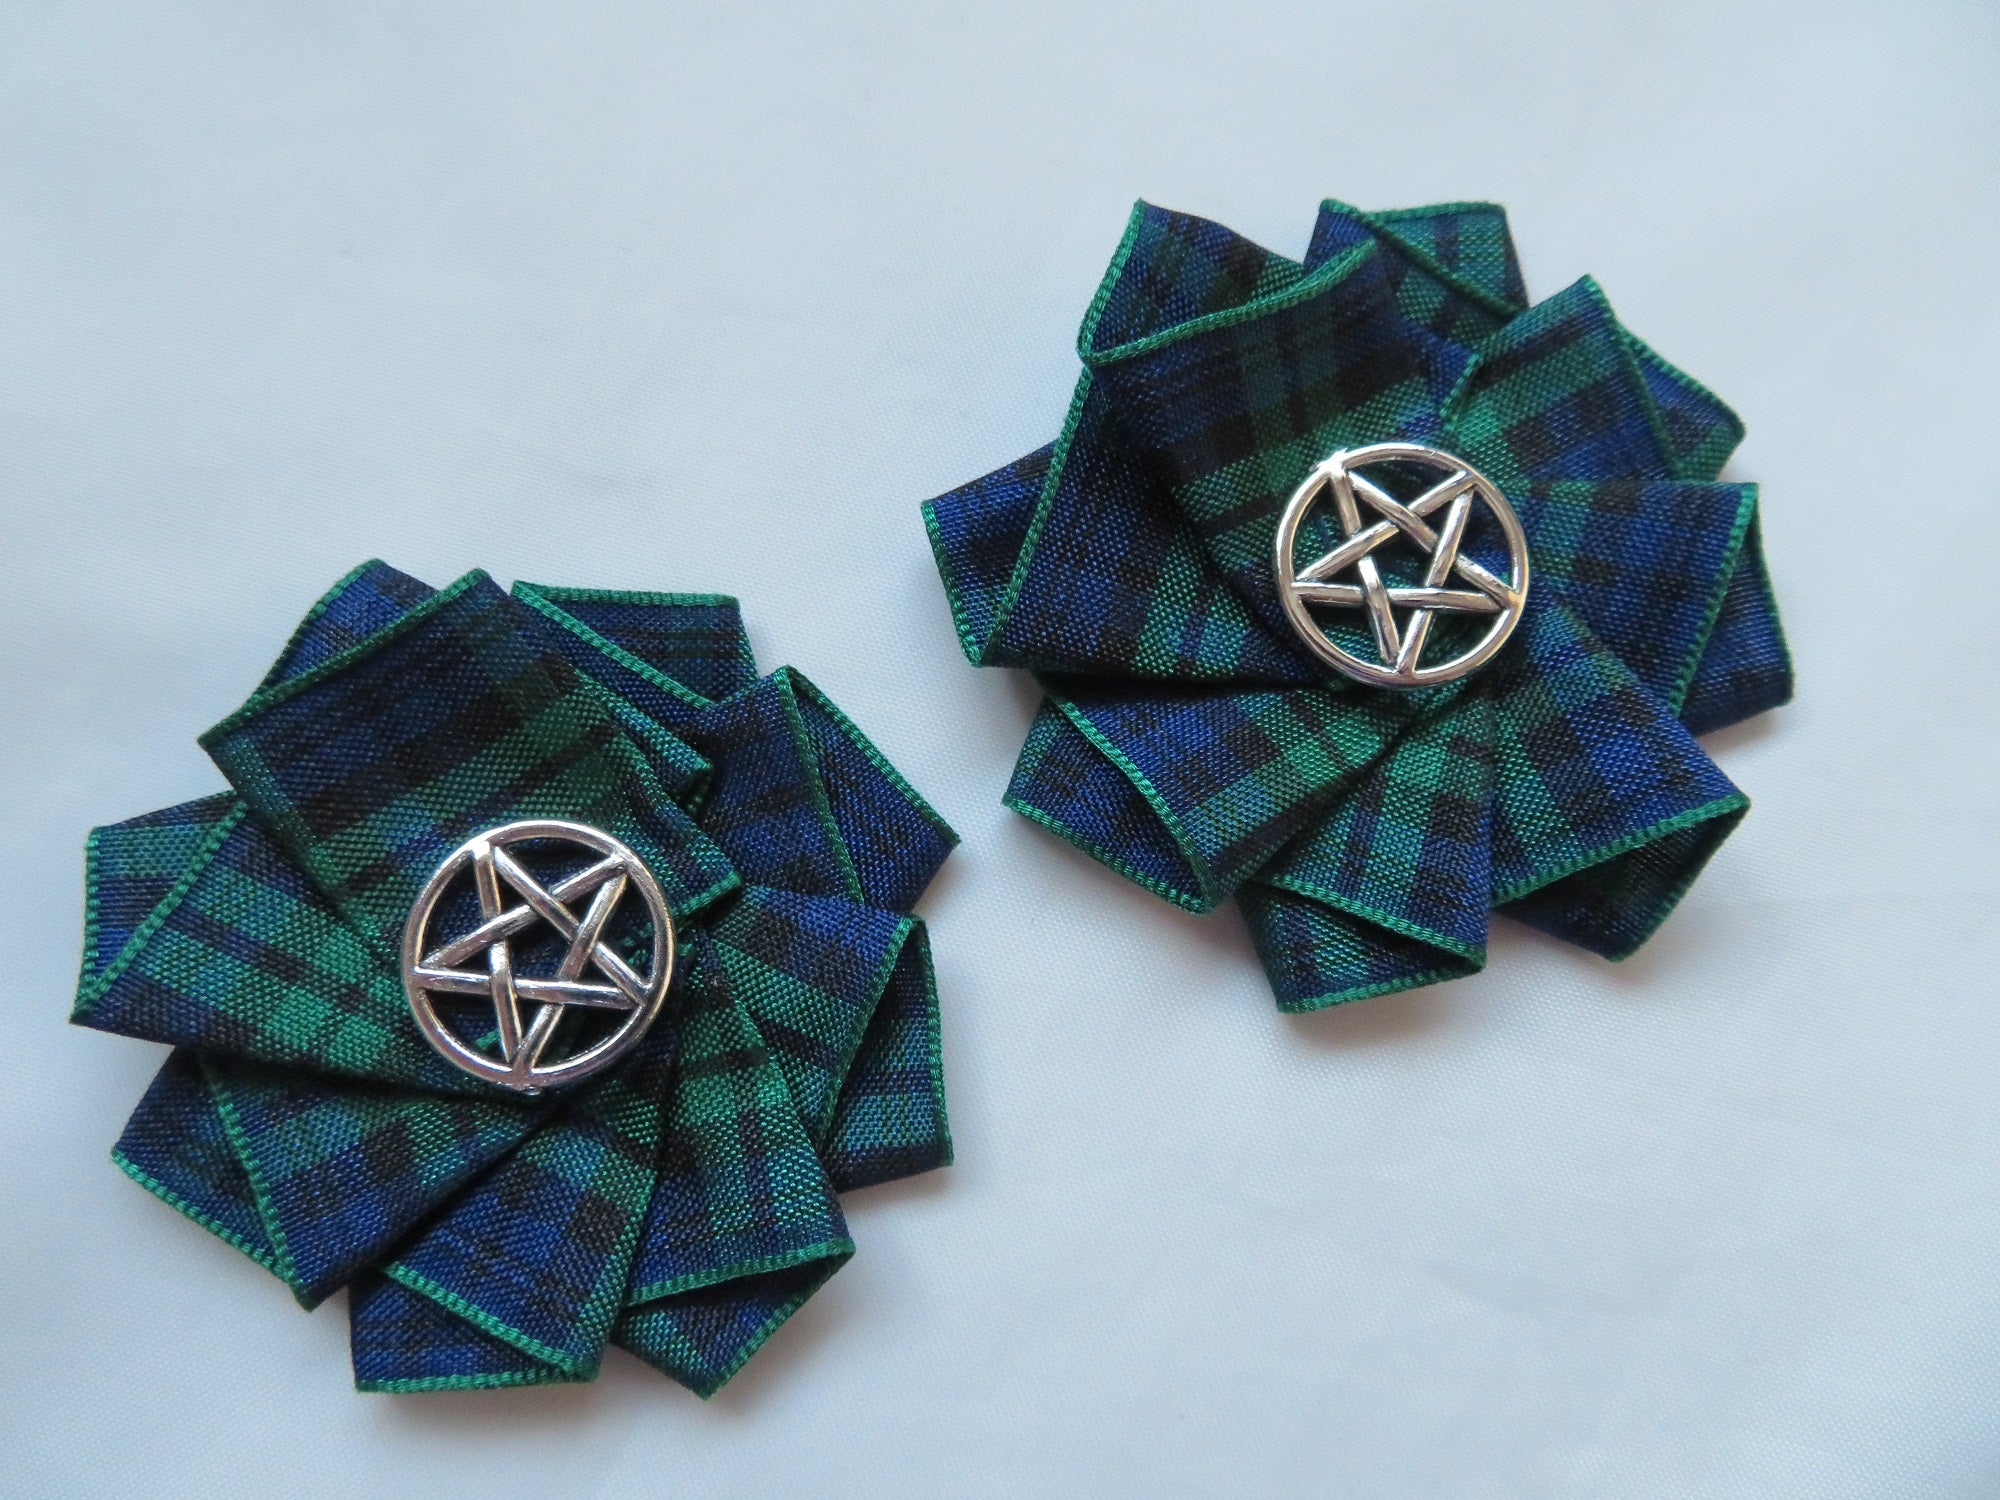 Black Watch Tartan Pentagram Shoe Clips Small Gothic Charm Satin Ruffle Shoeclips Silver Pentagrams Witch Magic Christmas Gifts- Ready Made